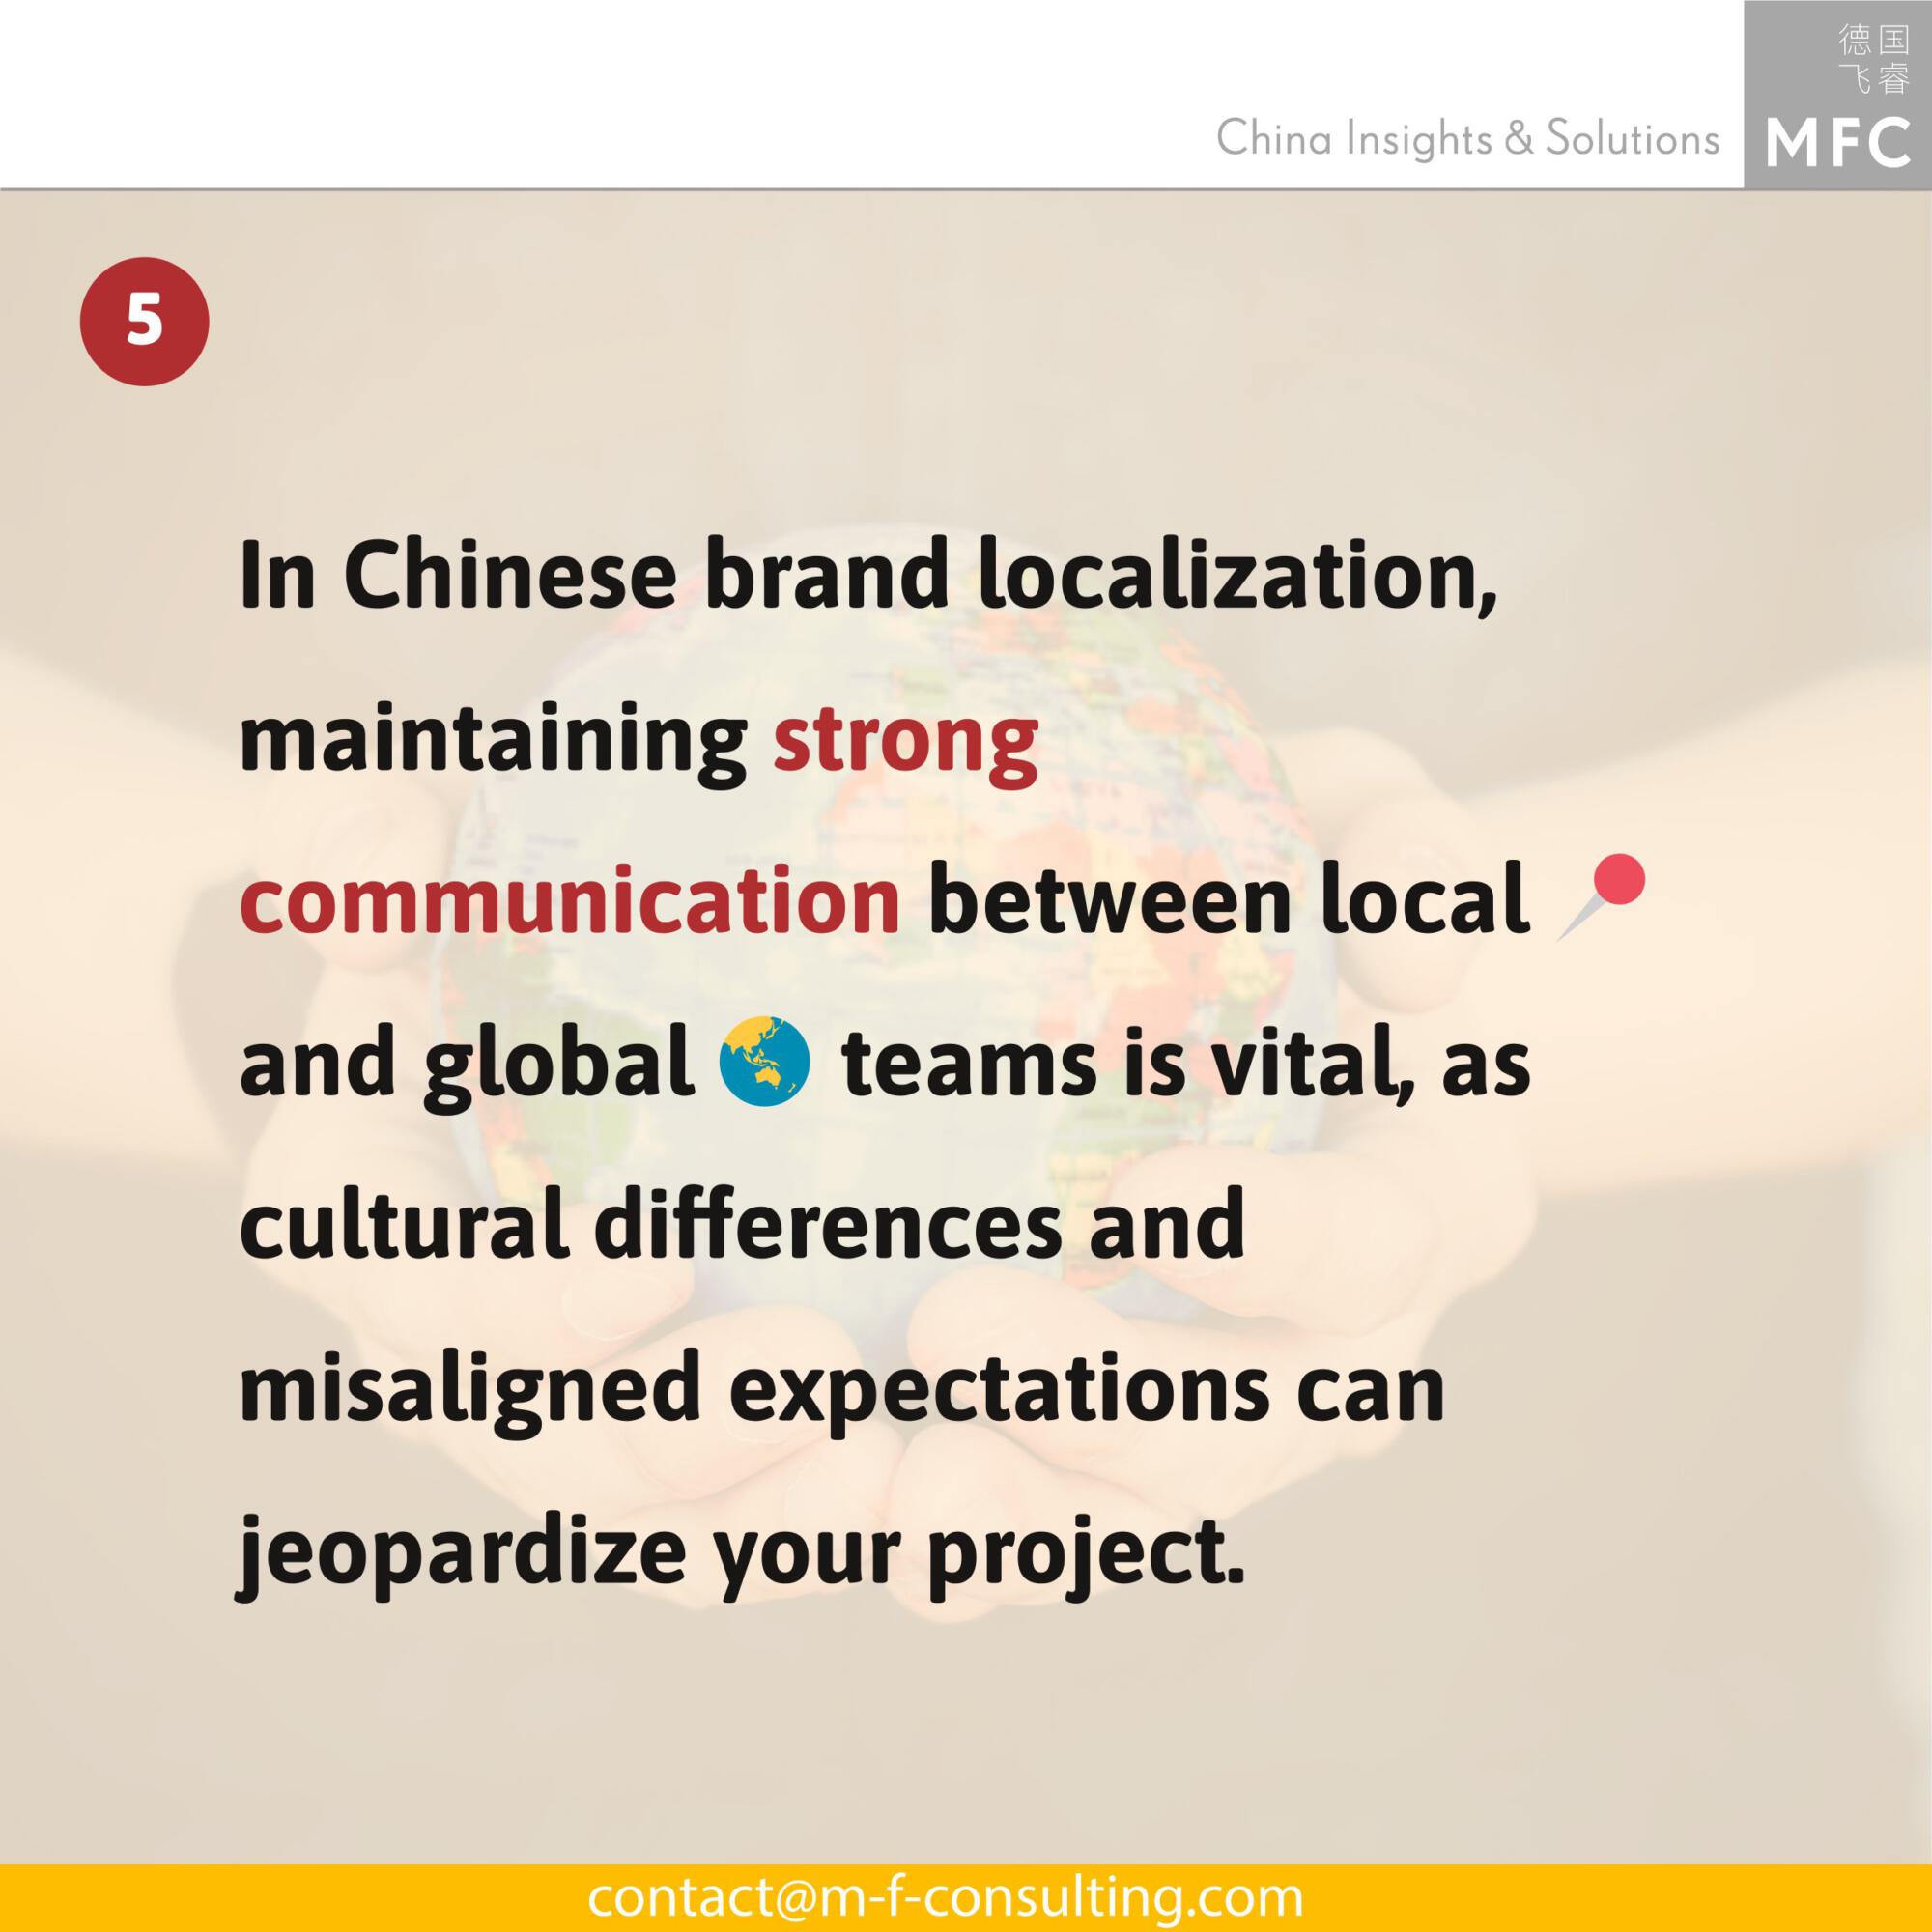 In Chinese brand localization, maintaining strong communication between local and global teams is vital, as cultural differences and misaligned expectations can jeopardize your project.